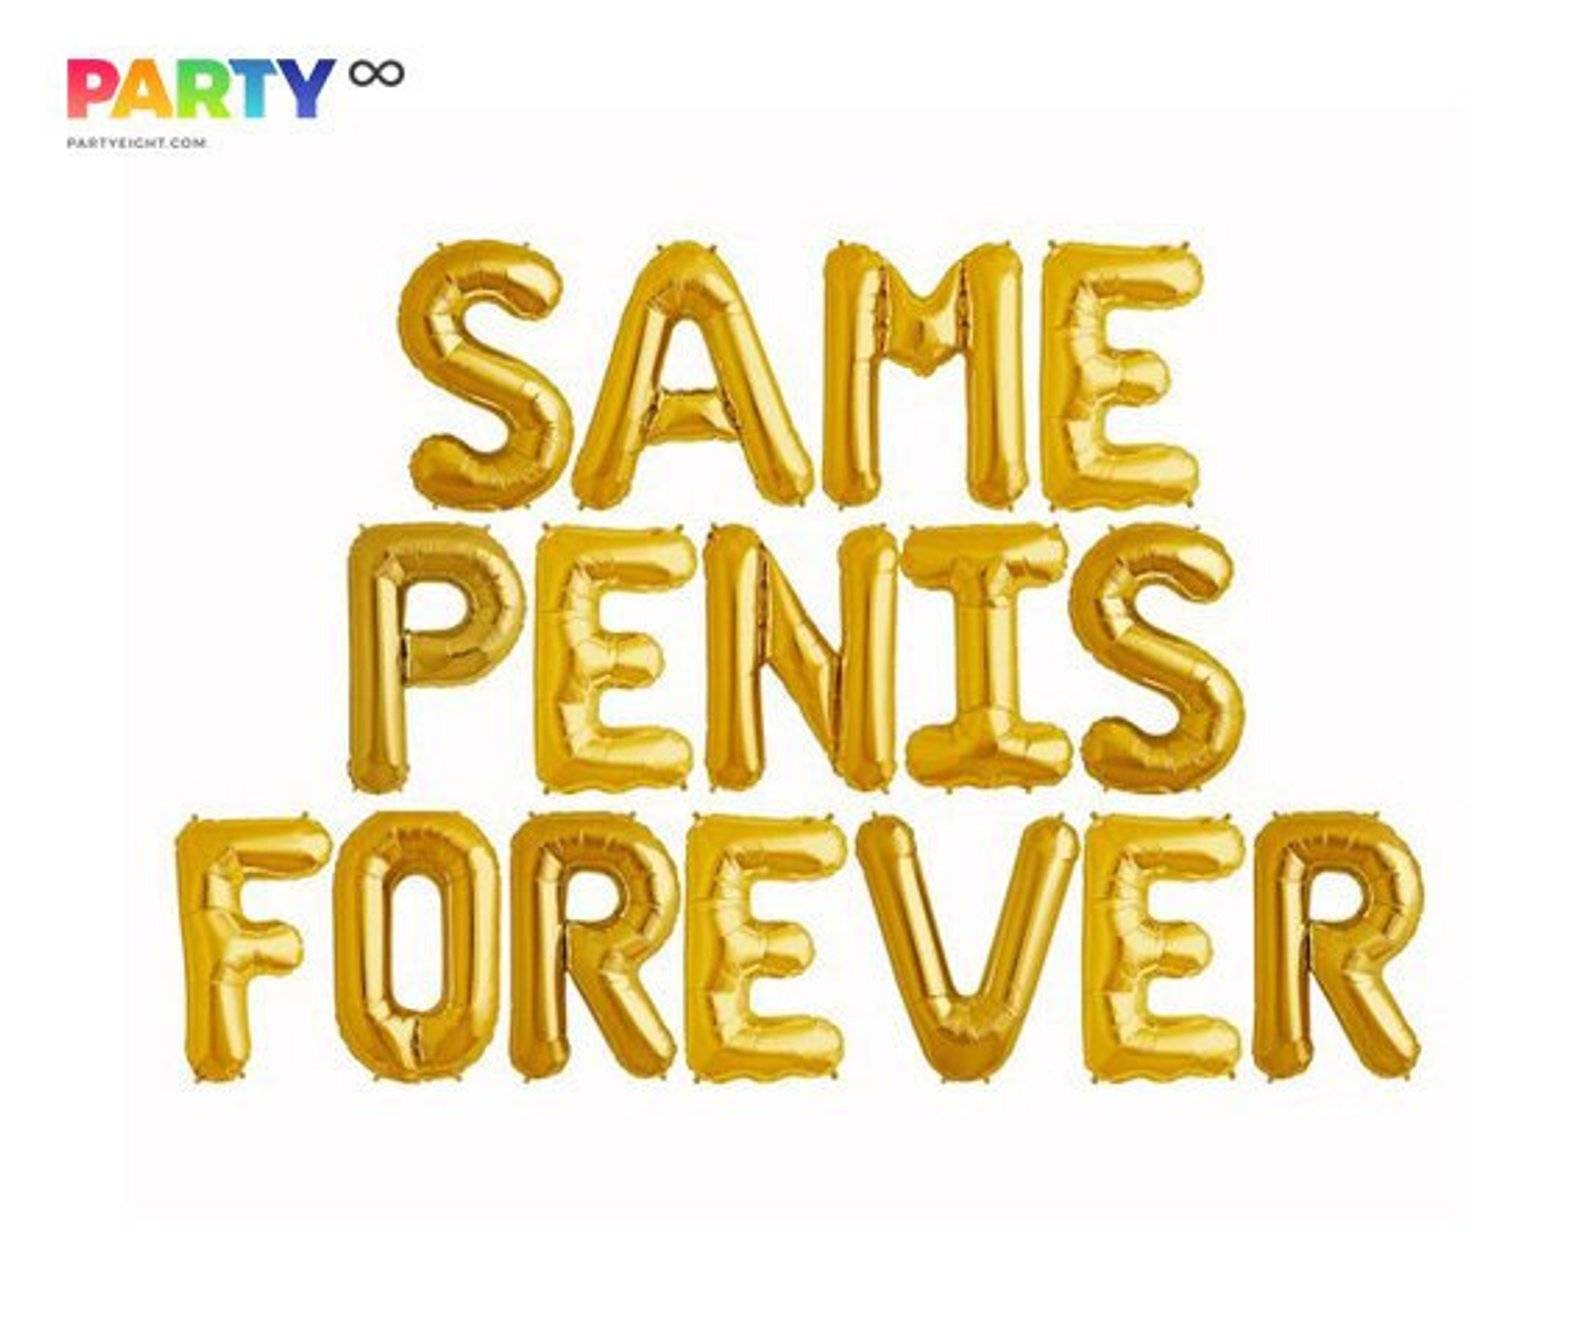 Same Penis Forever Balloons Letter Banner | bachelorette party decorations | bachelorette ideas | Gay Party photo prop banner favors